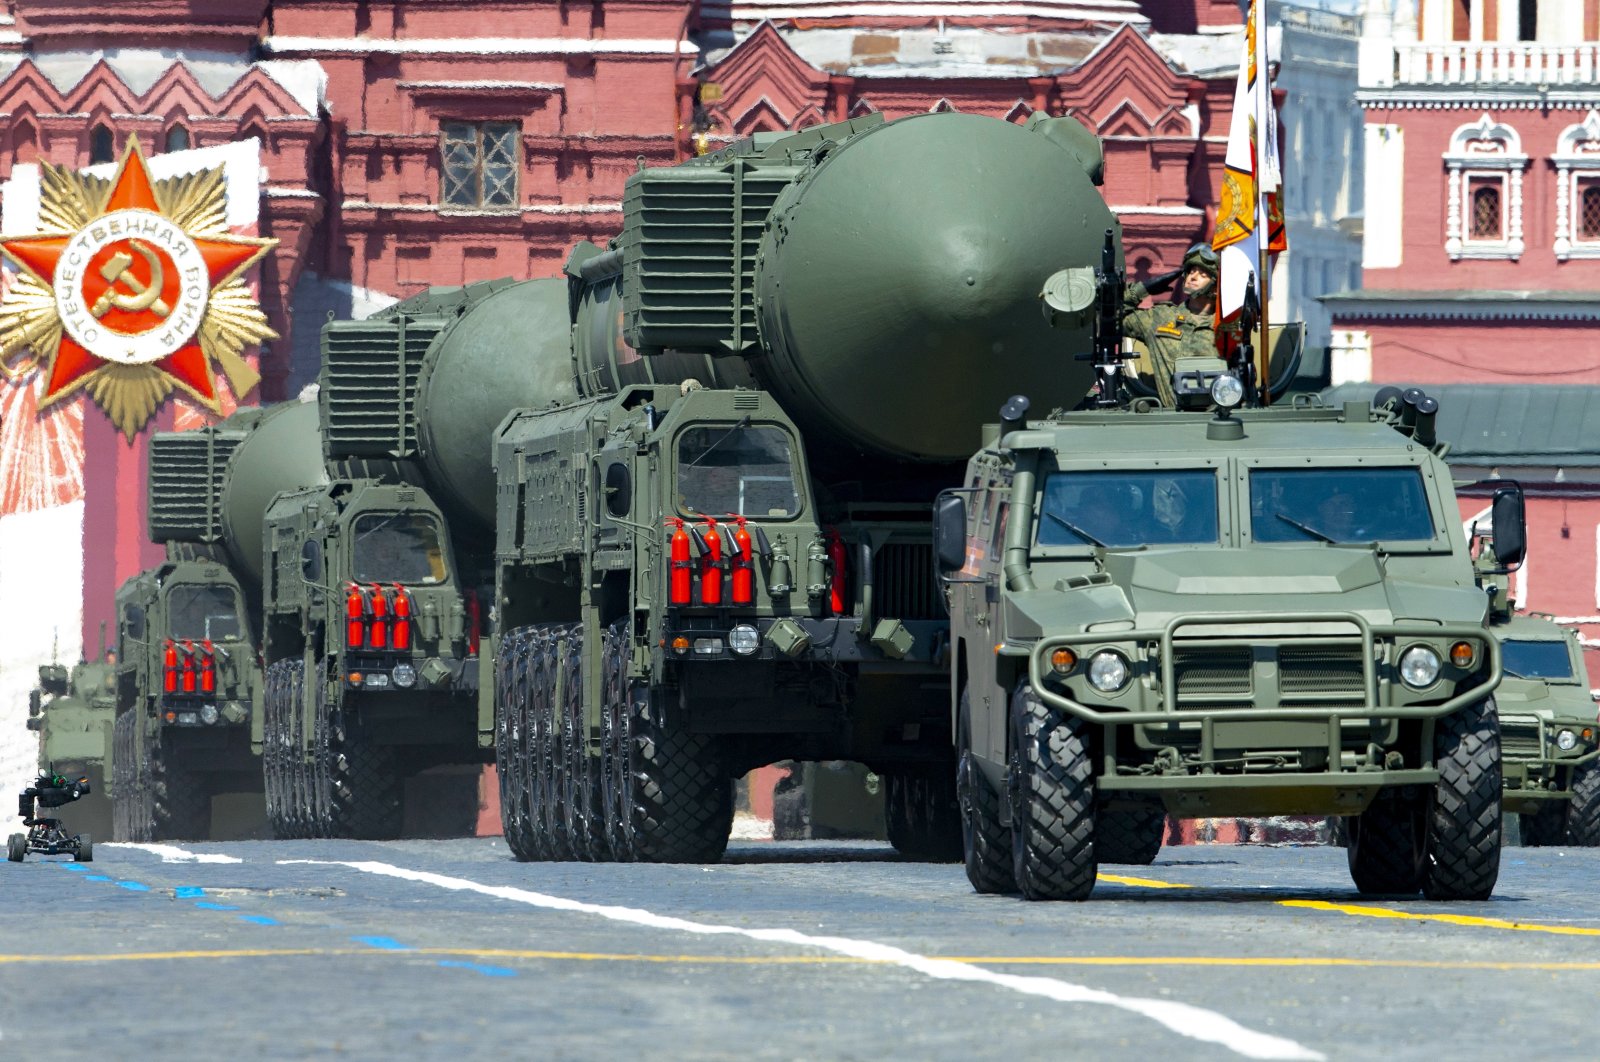 Russian RS-24 Yars ballistic missiles roll in Red Square during the Victory Day military parade marking the 75th anniversary of the Nazi defeat in Moscow, Russia, June 24, 2020. (AP Photo)